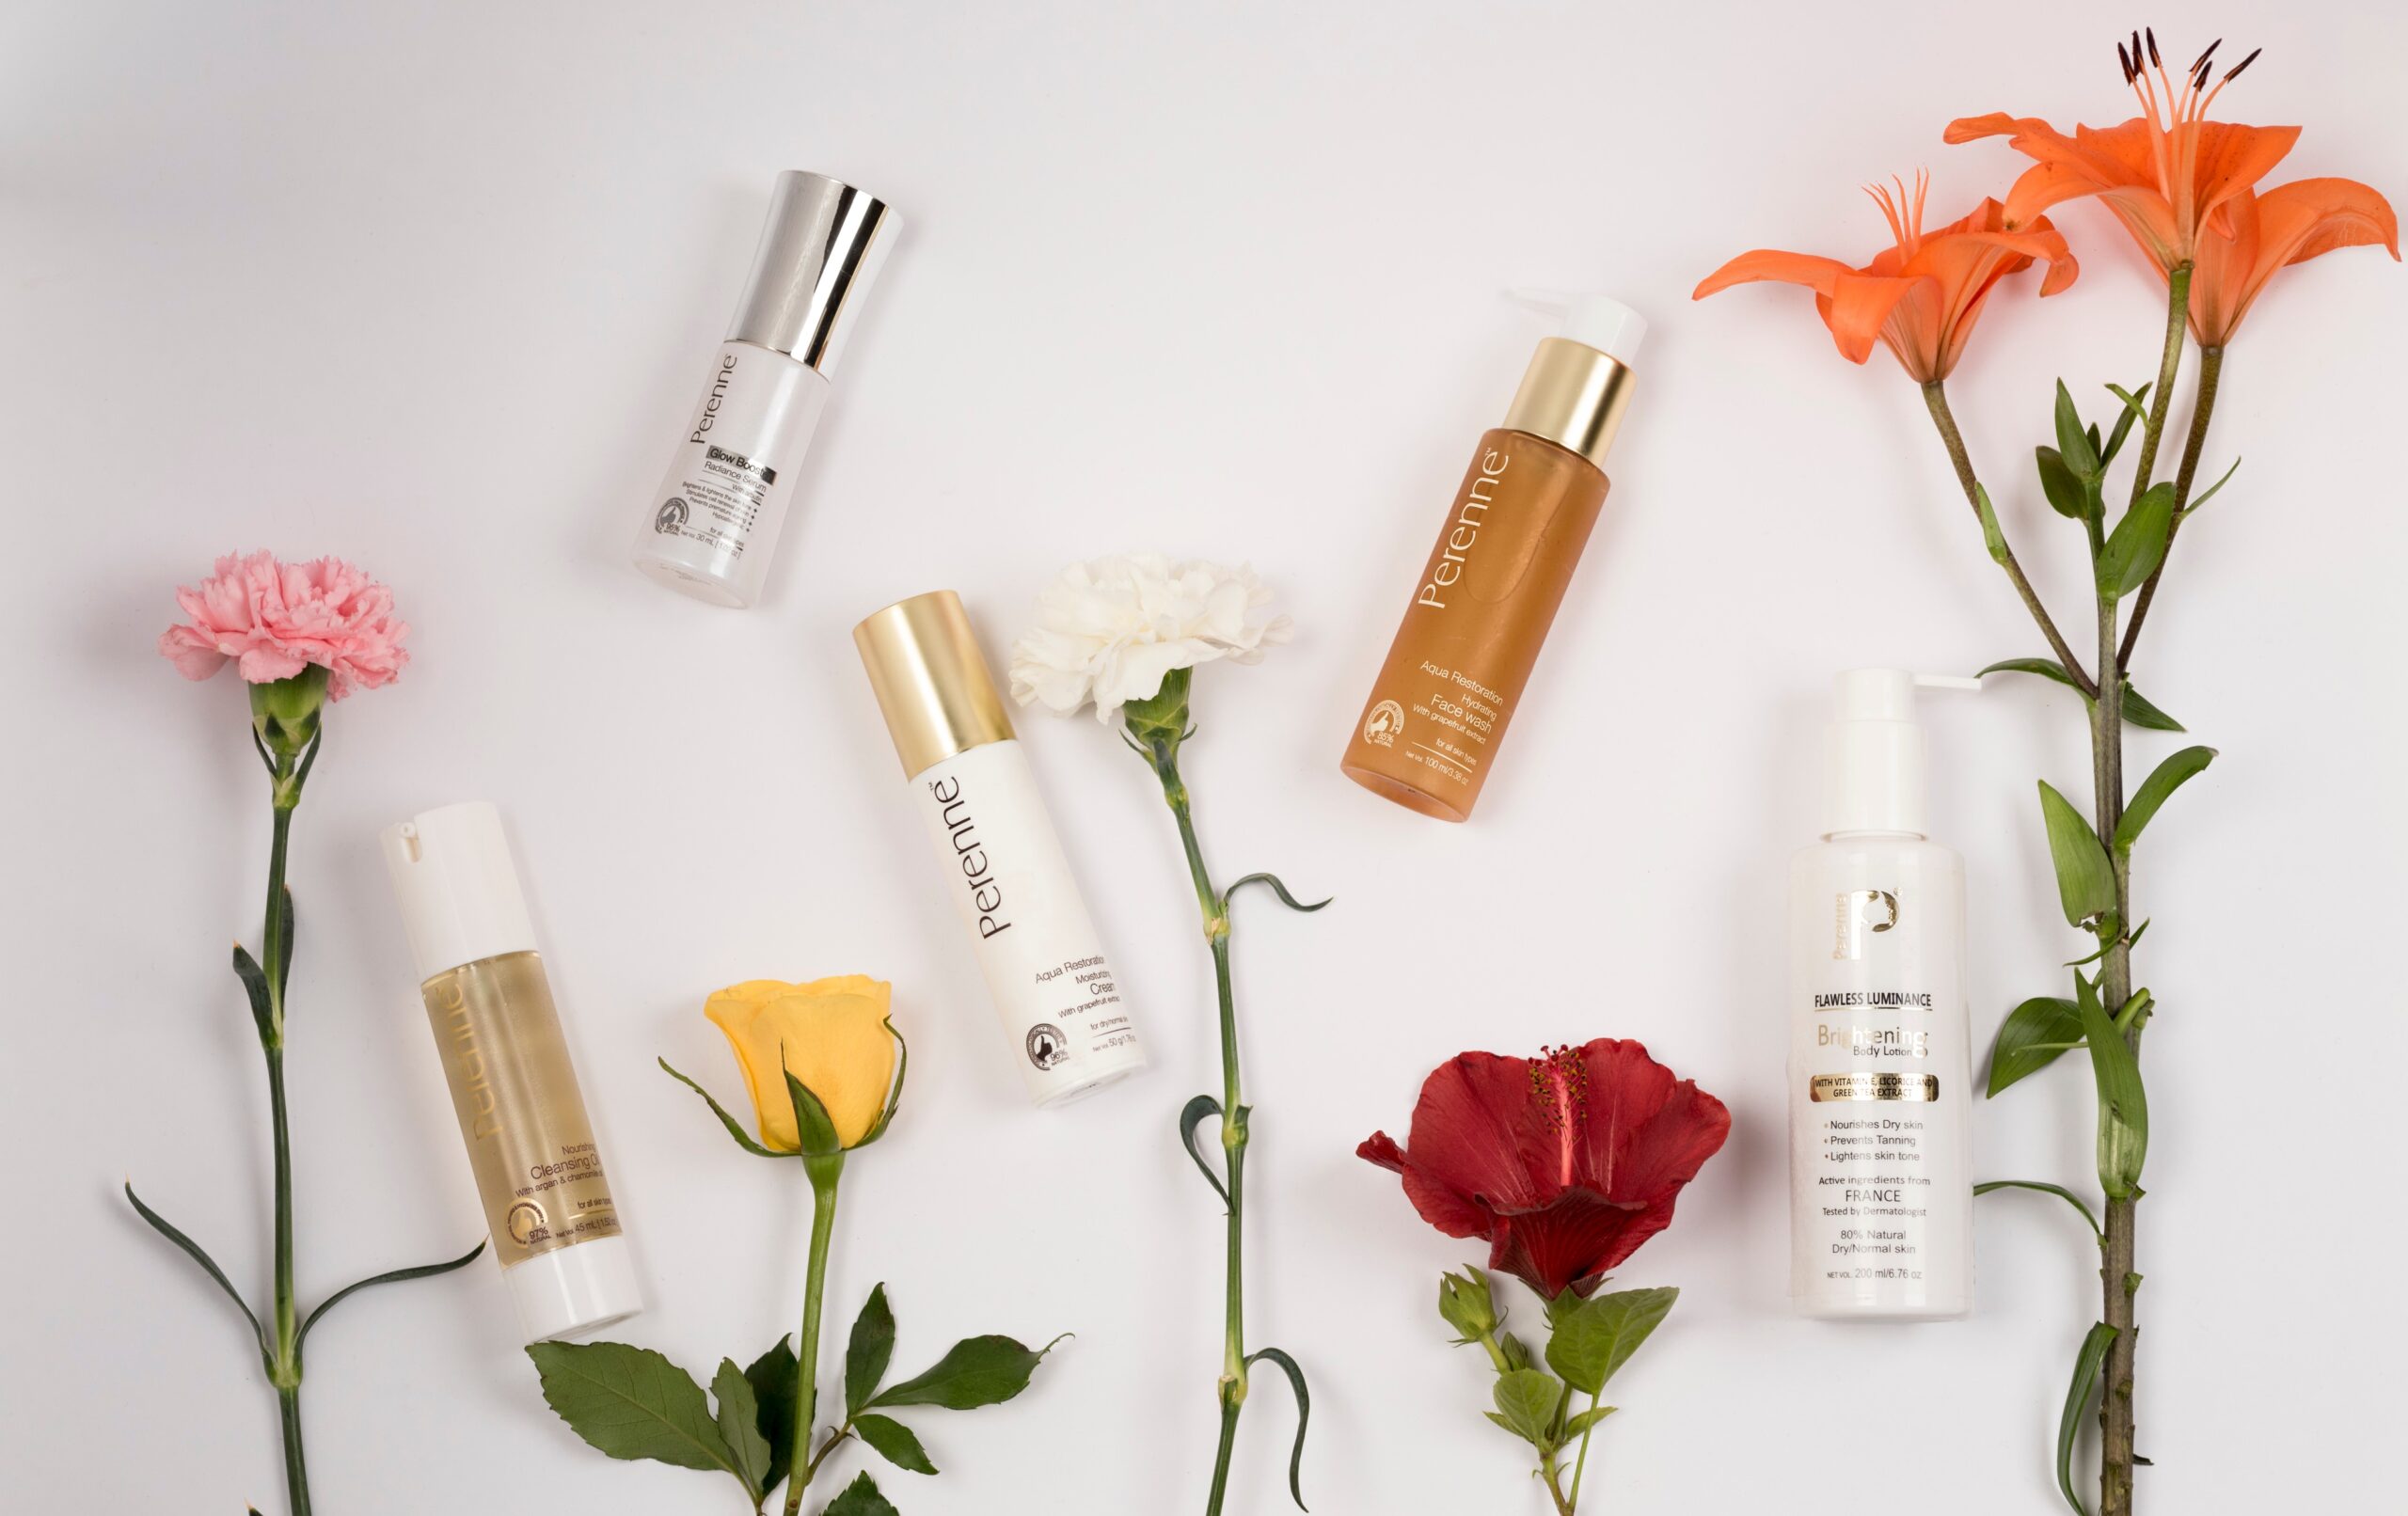 15 Sustainable Beauty Brands to Make Greener Beauty Choices